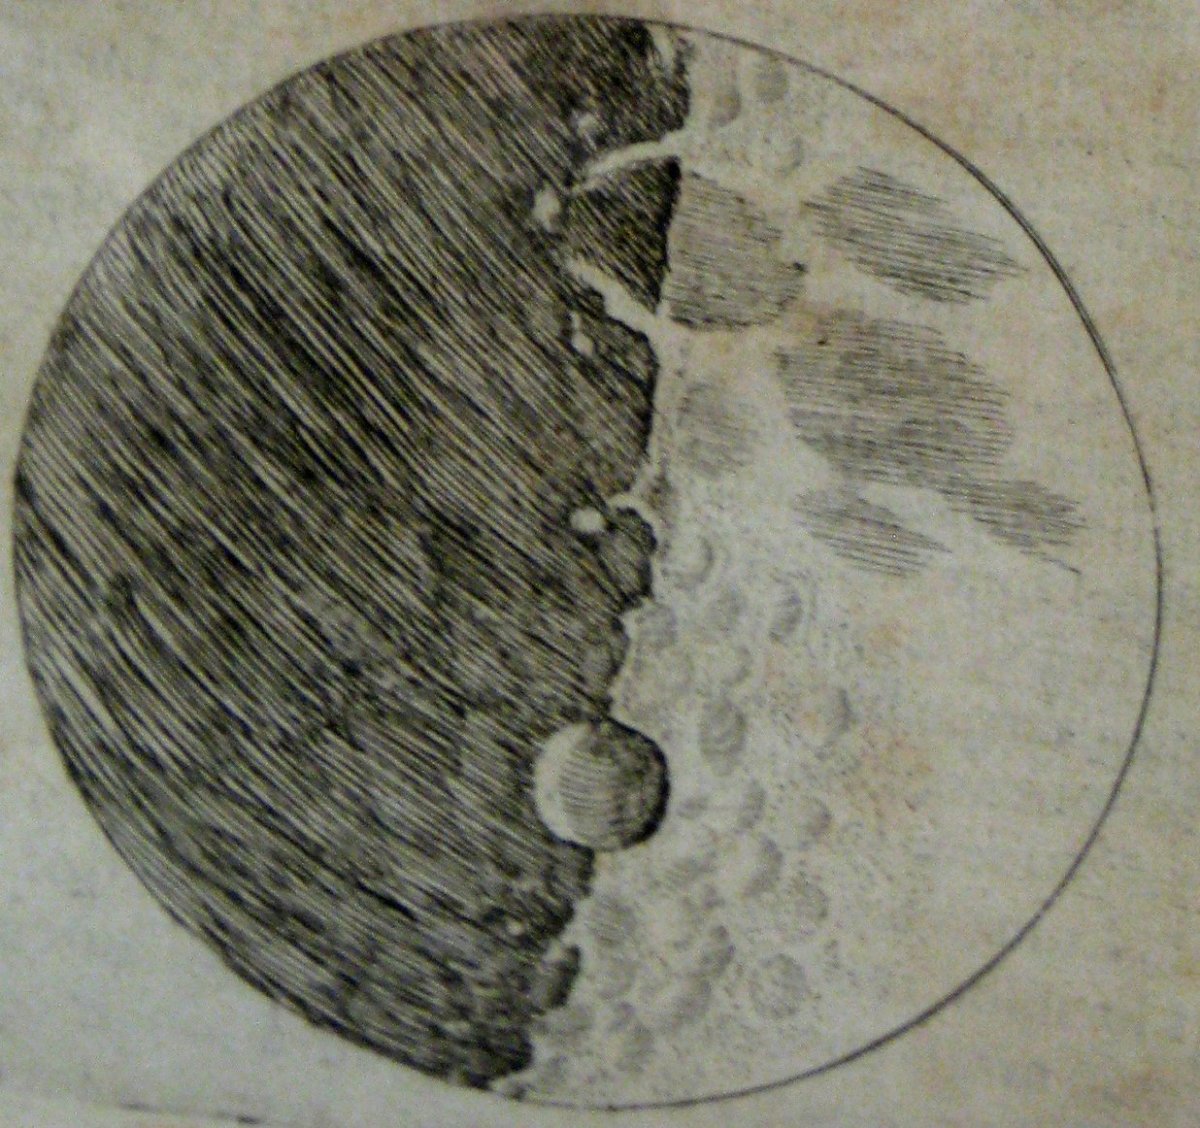 Galileo’s drawing of the surface of the Moon.